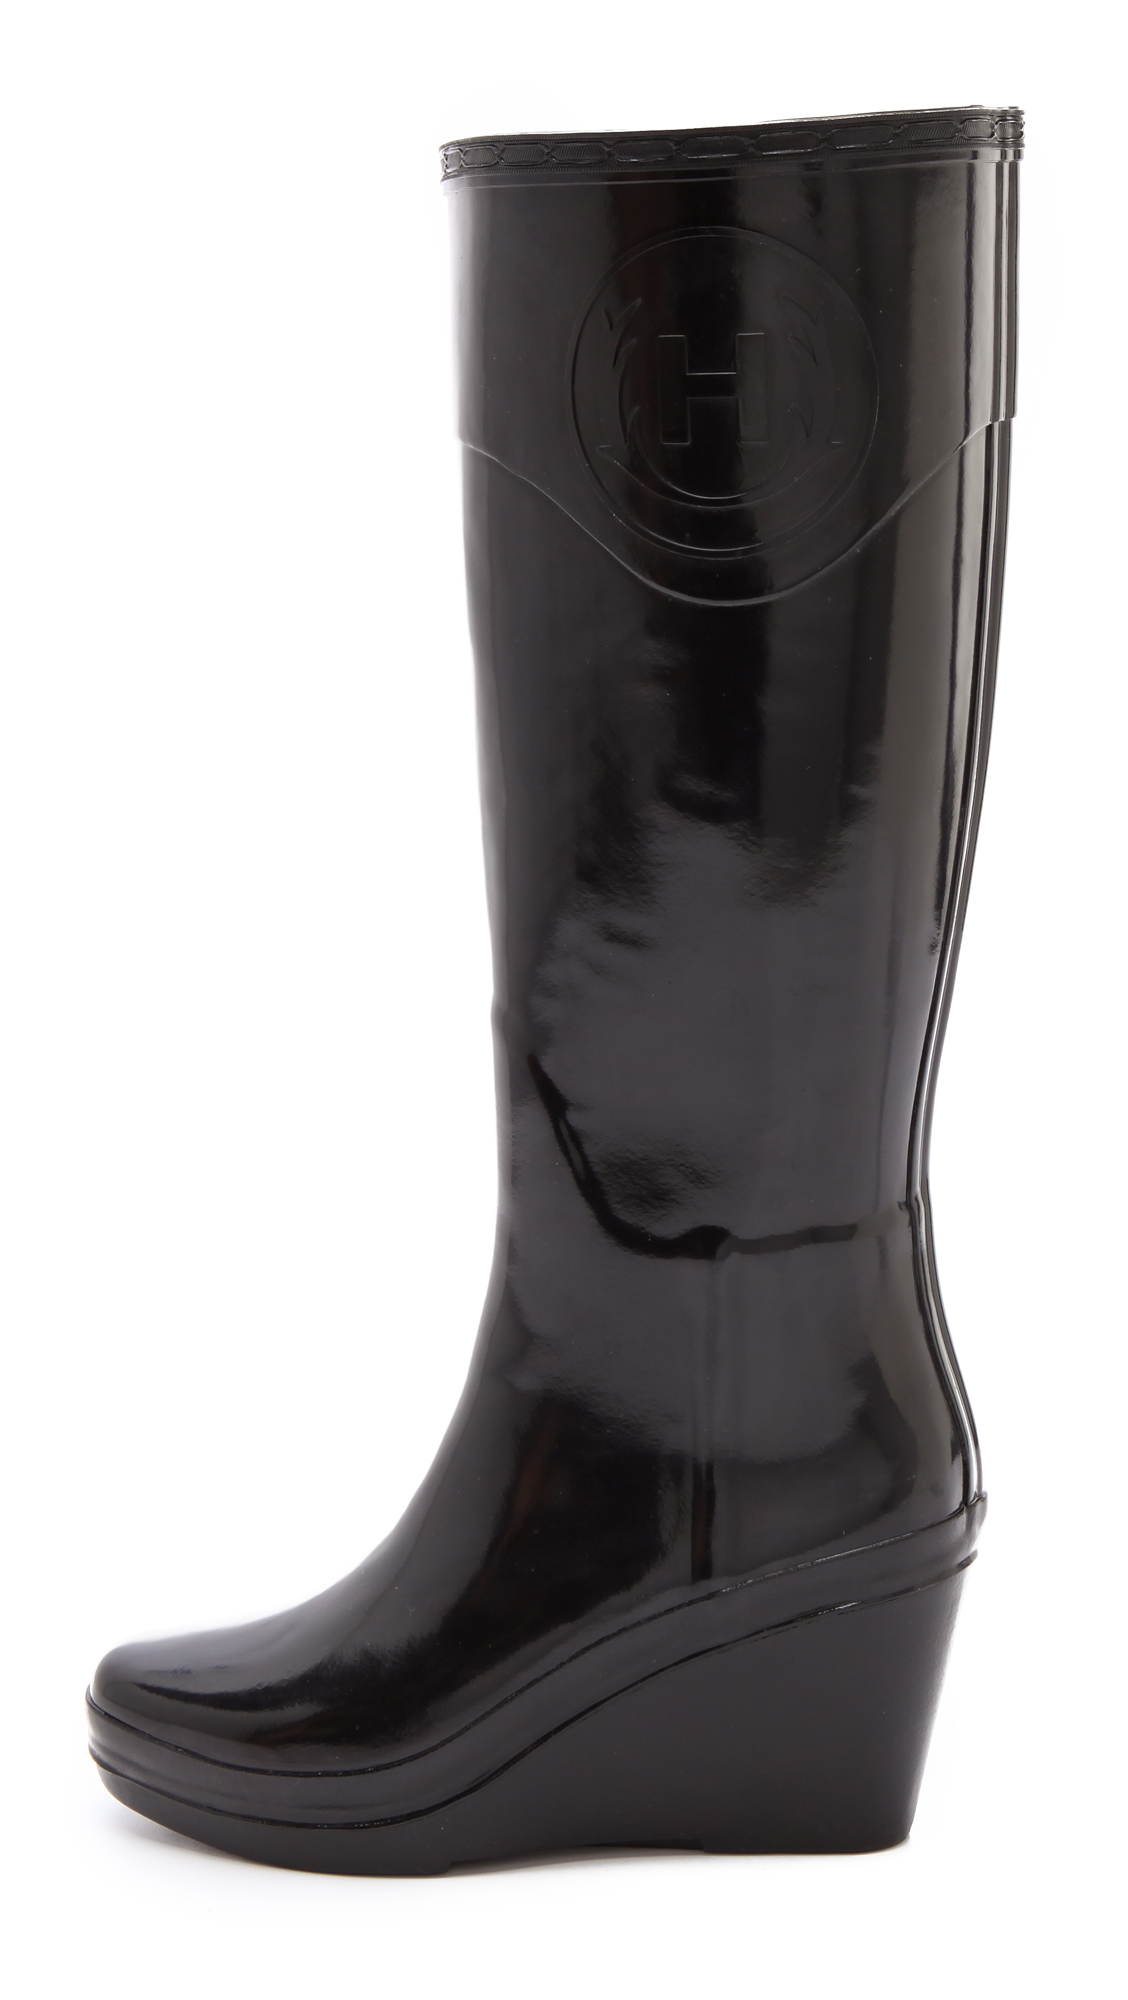 Lyst Hunter Champery Wedge Boots in Black